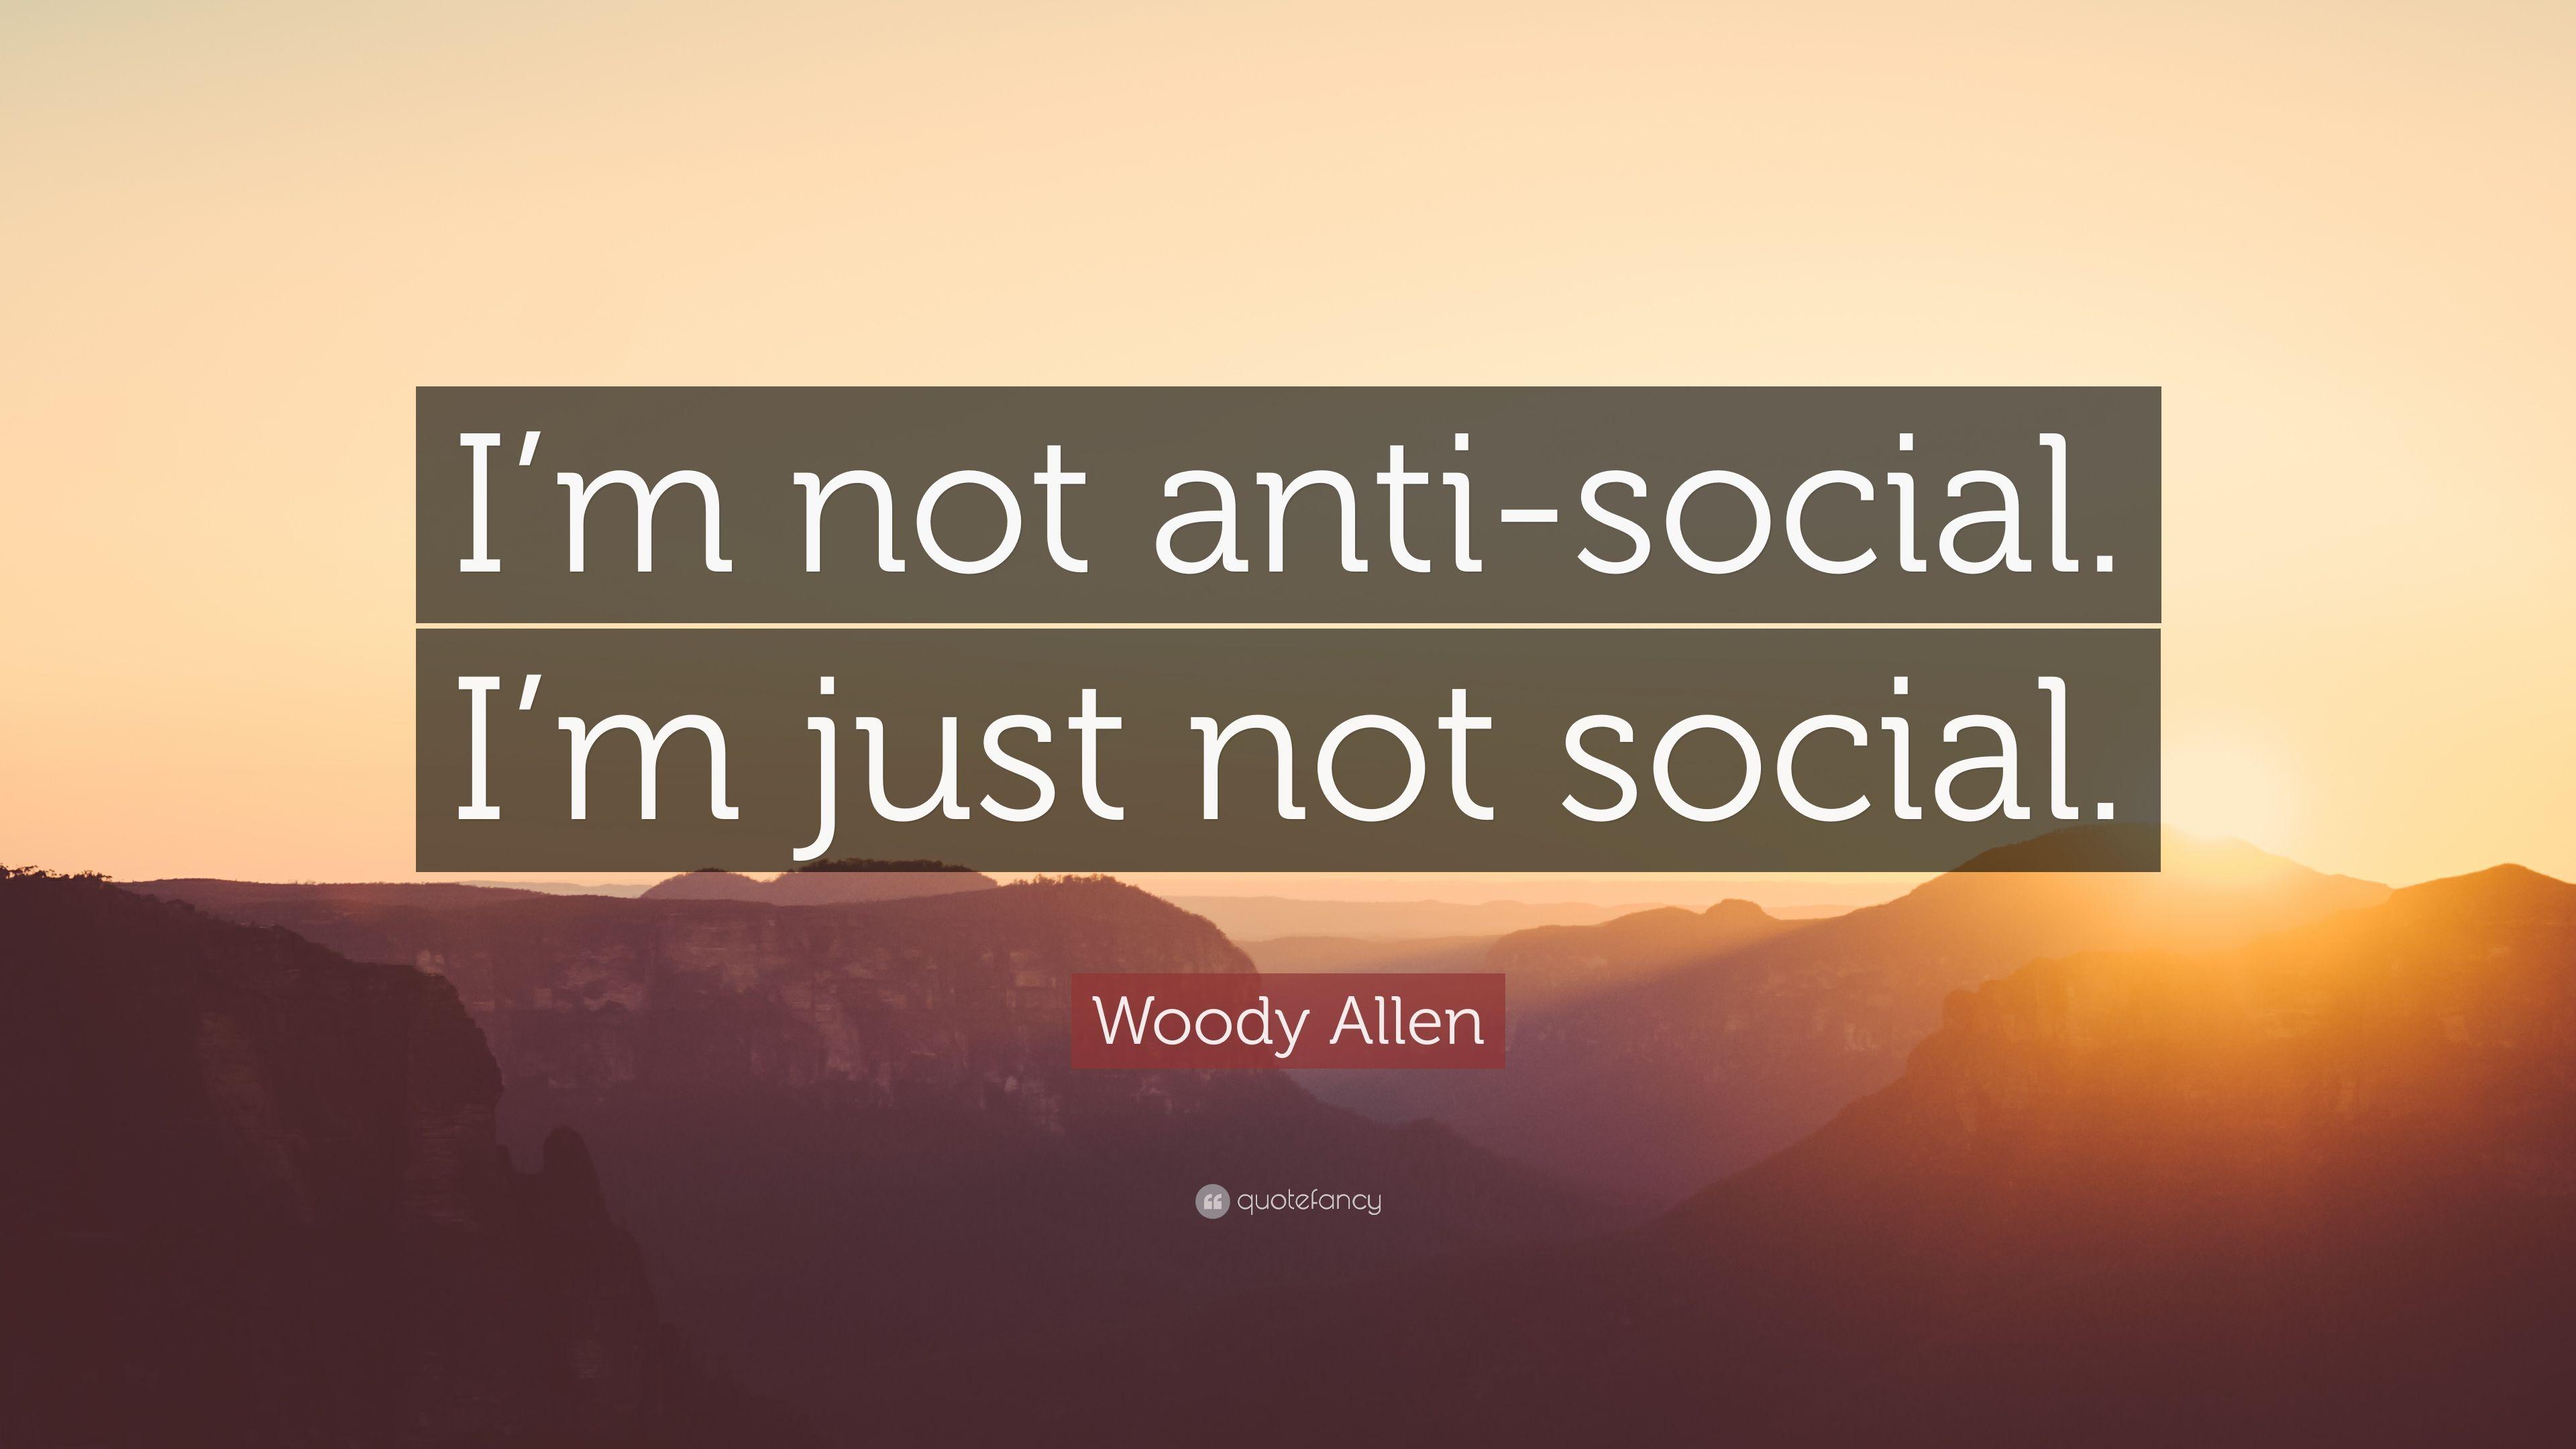 Woody Allen Quote: “I'm Not Anti Social. I'm Just Not Social.” 12